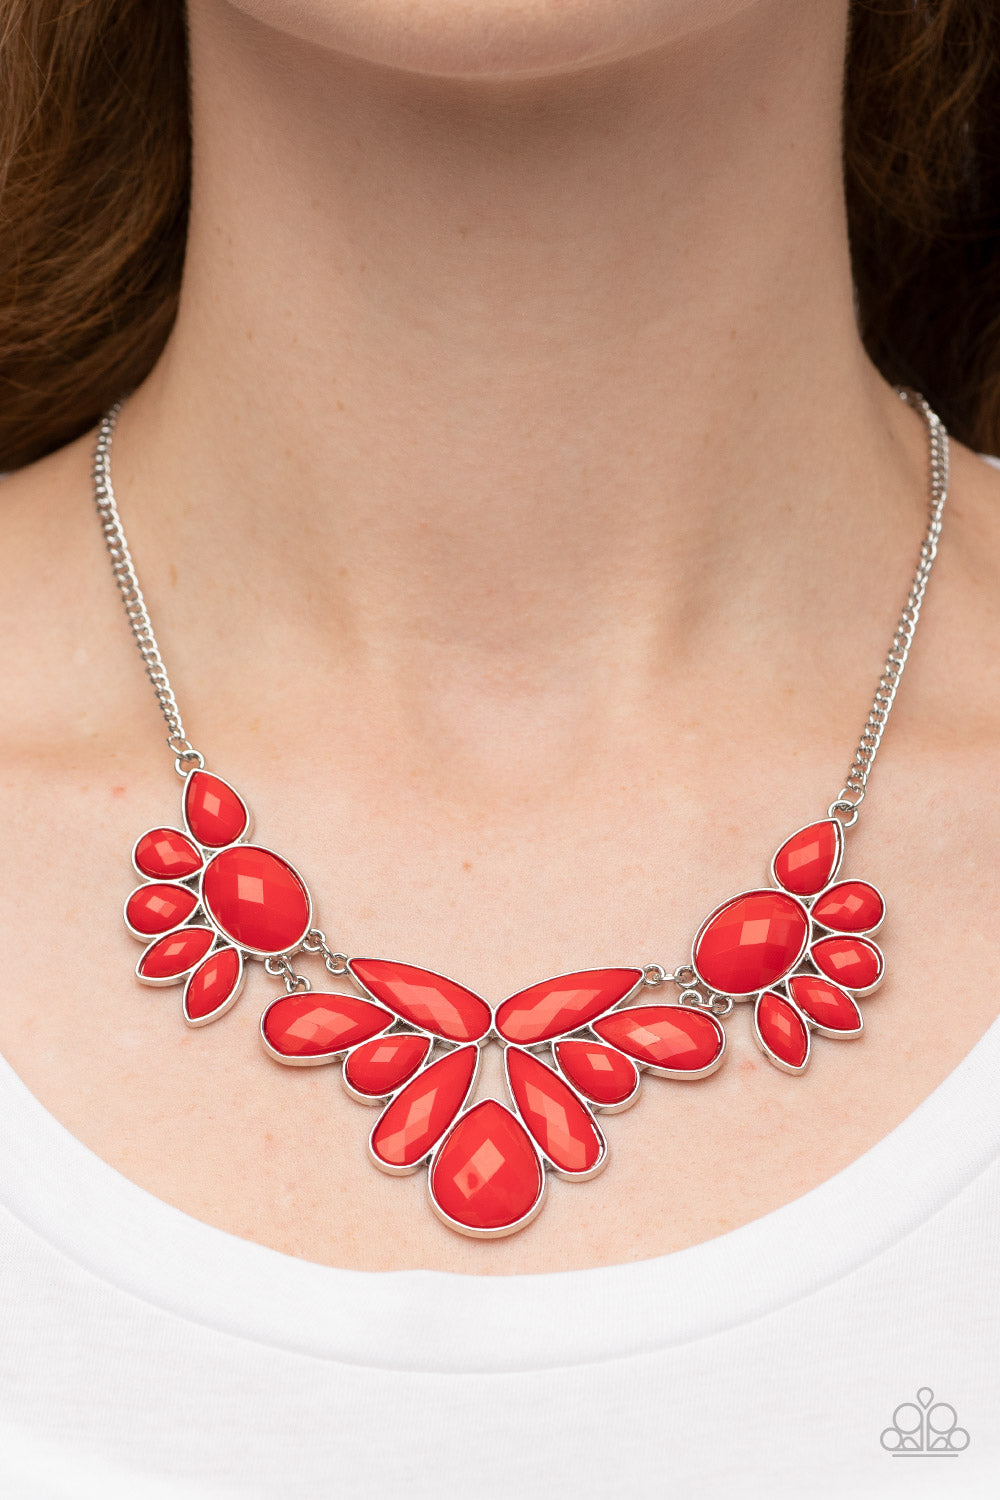 A Passing FAN-cy Red Necklace - Paparazzi Accessories  A dewy collection of oval, teardrop, and marquise red beads fans out below the collar, blooming into enchanting floral frames that delicately link into a whimsical centerpiece.  Sold as one individual necklace. Includes one pair of matching earrings.